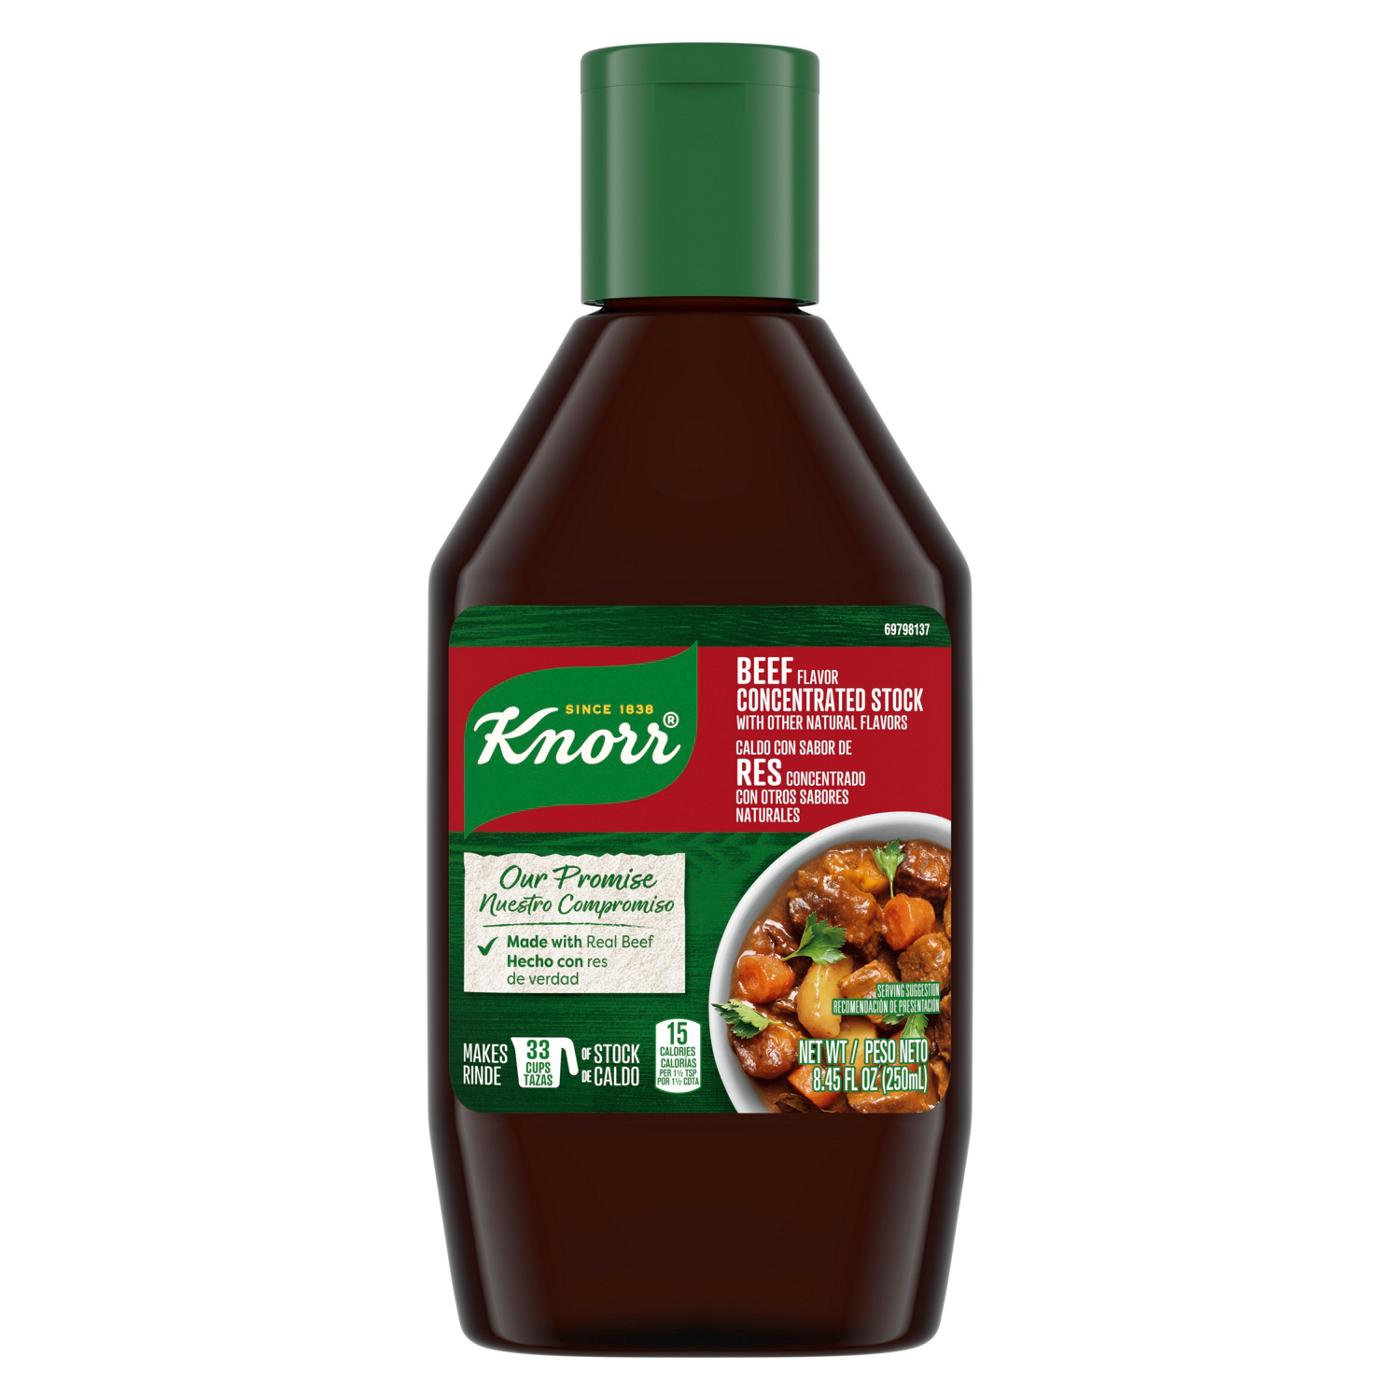 Knorr Concentrated Stock Beef; image 1 of 3